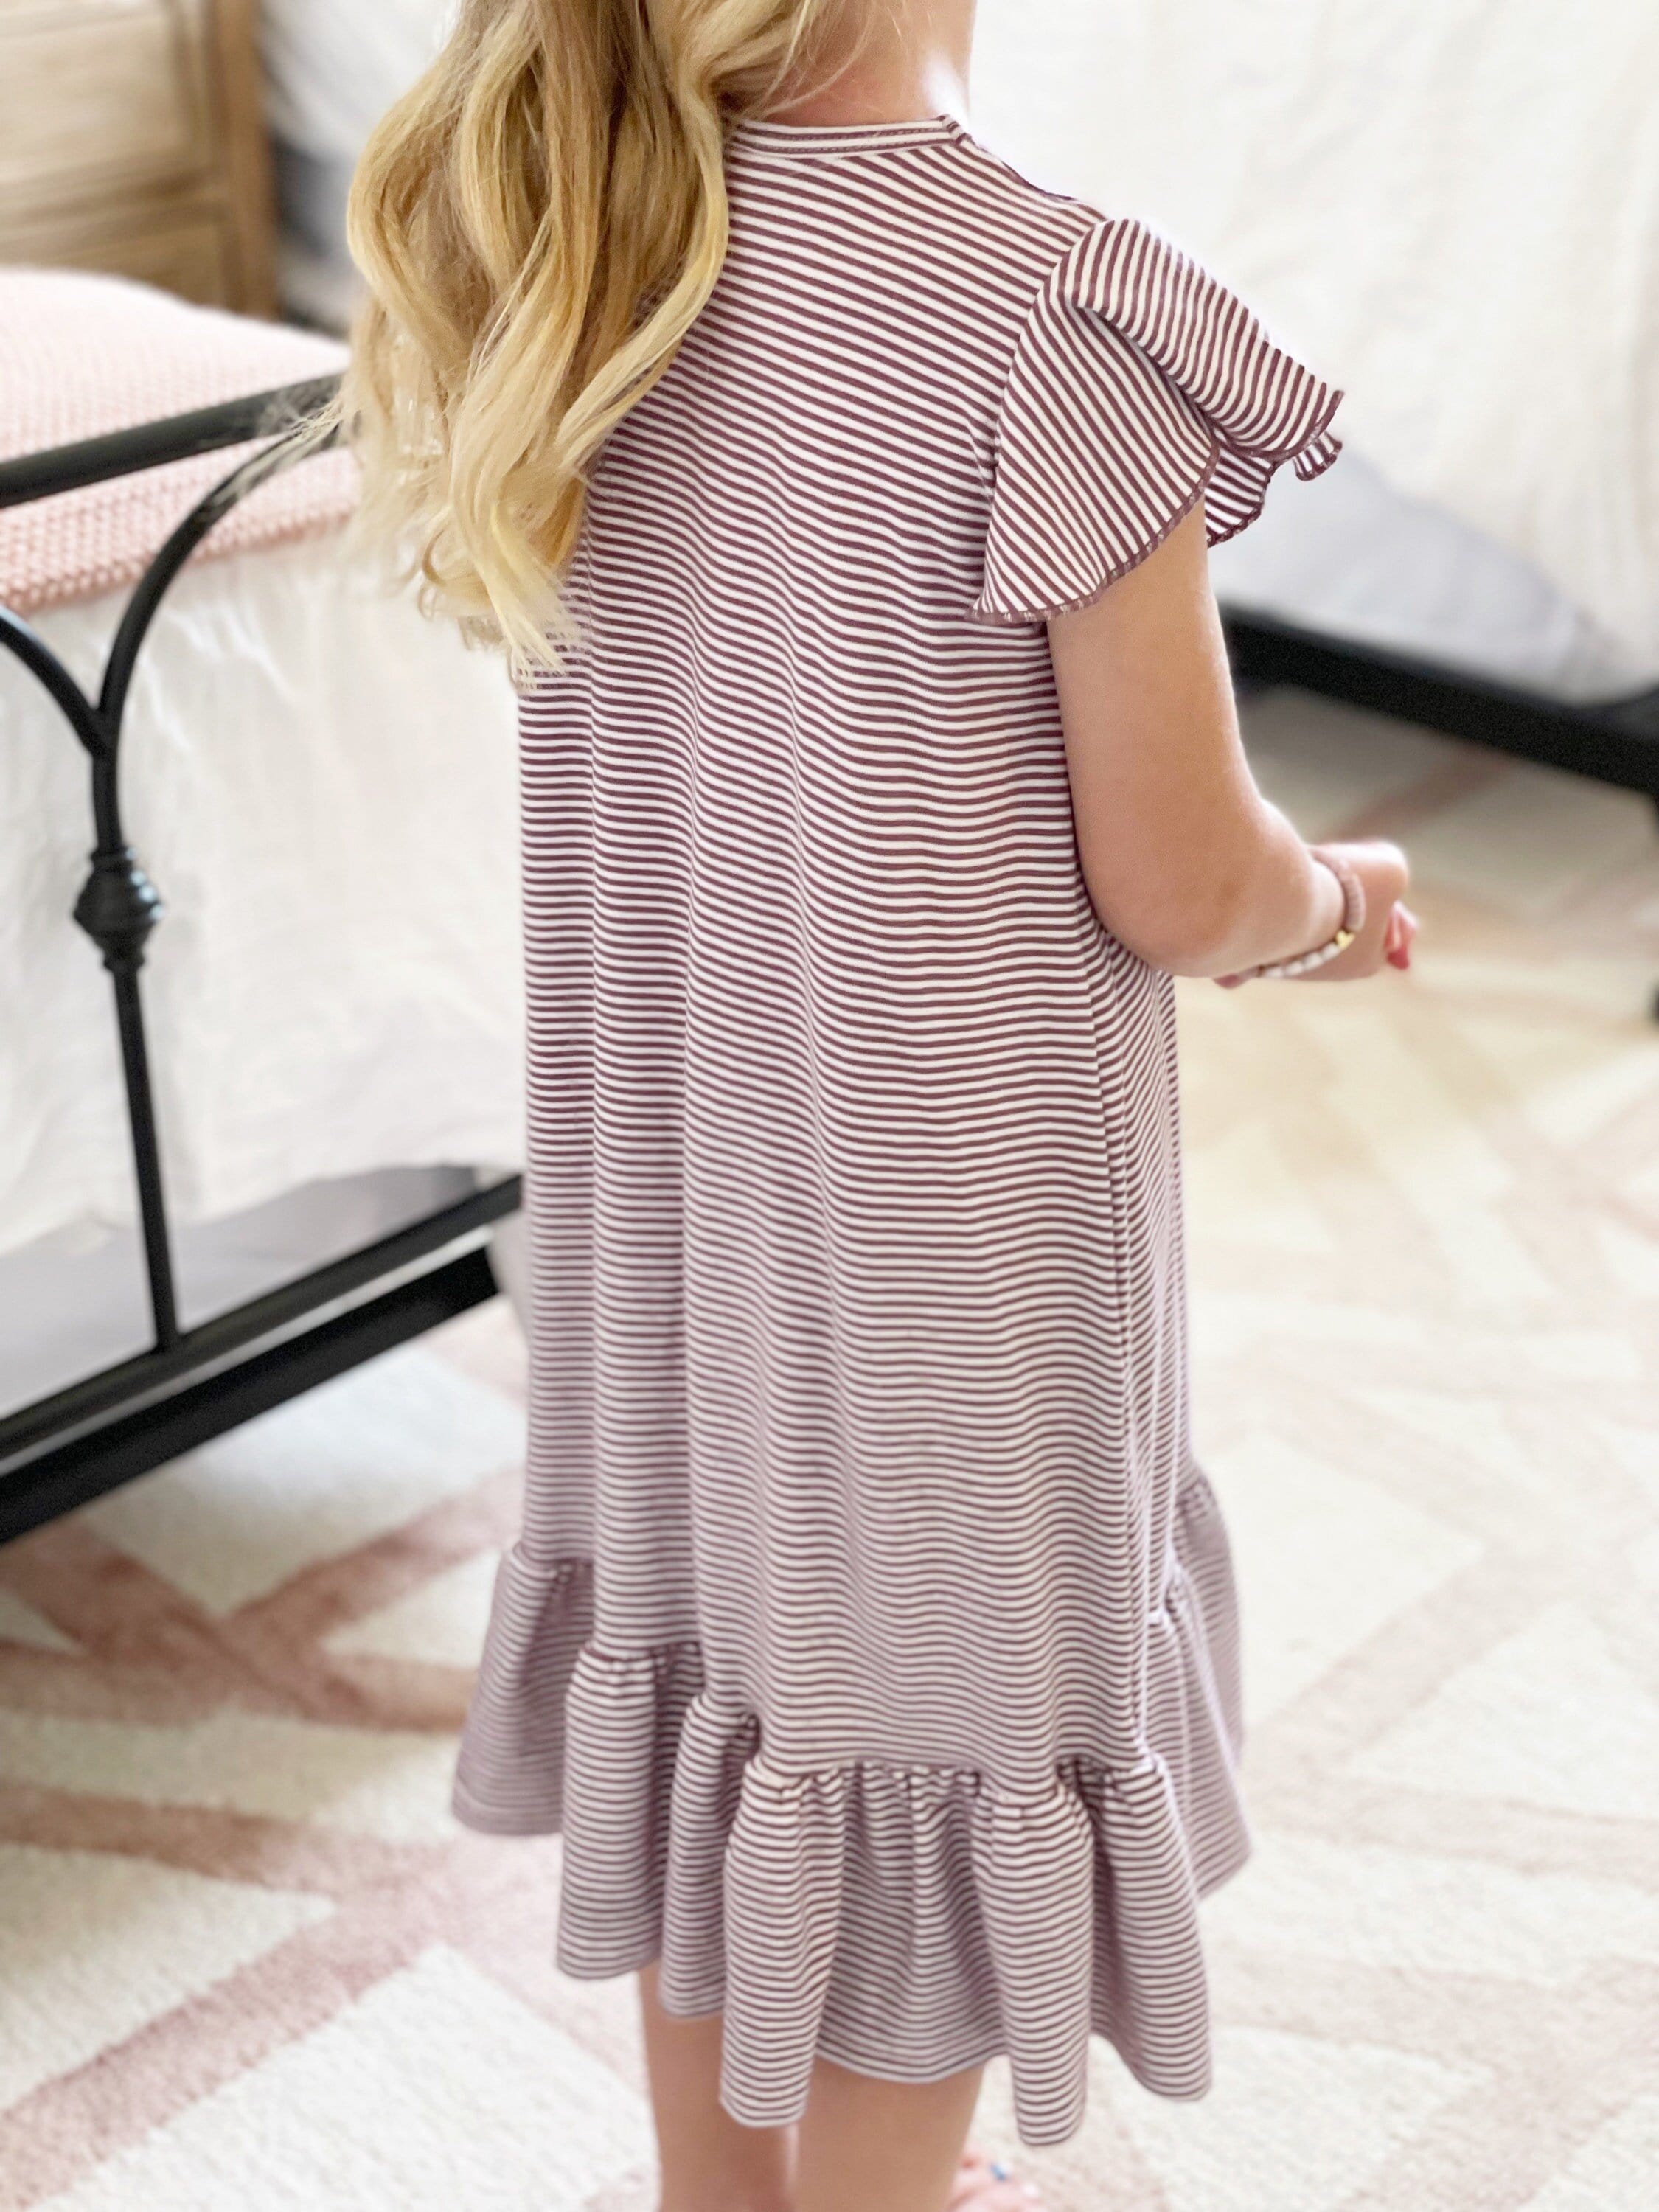 NEW** Halle Nightgown Russet Stripe, Kids Nightgown, Baby Nightgown, Toddler Nightgown, Girl Nightgown, Toddler Gift, Baby Gift